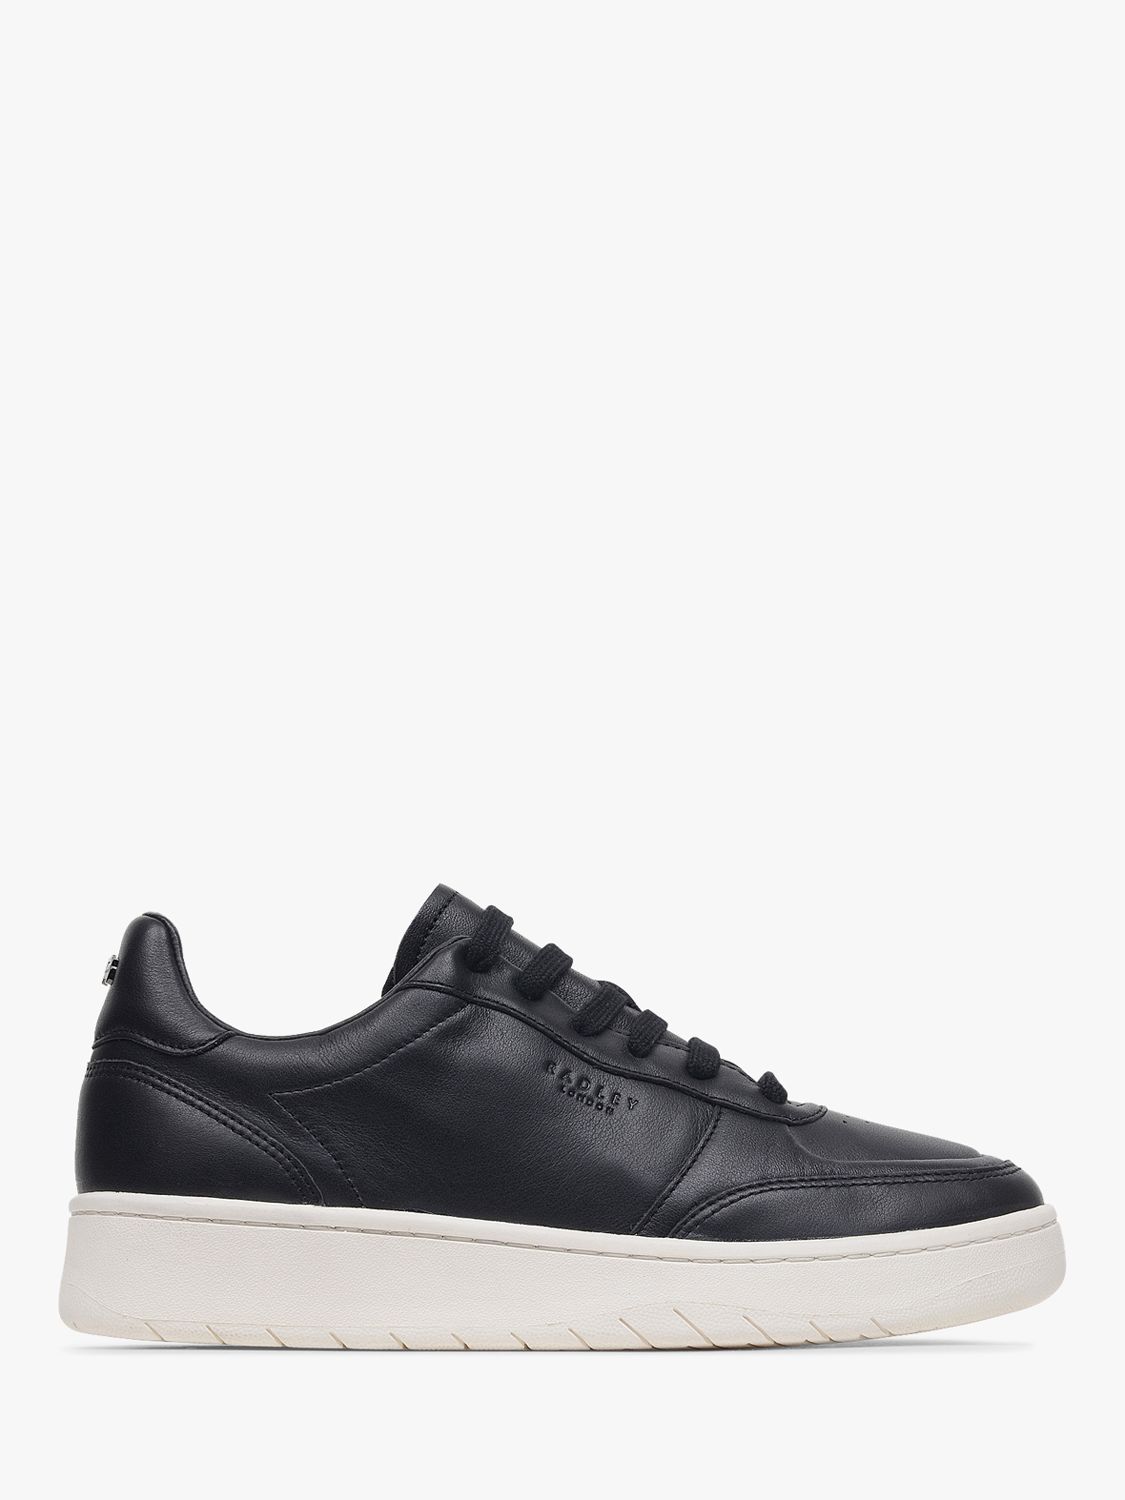 Radley Danesdale Leather Trainers, Black